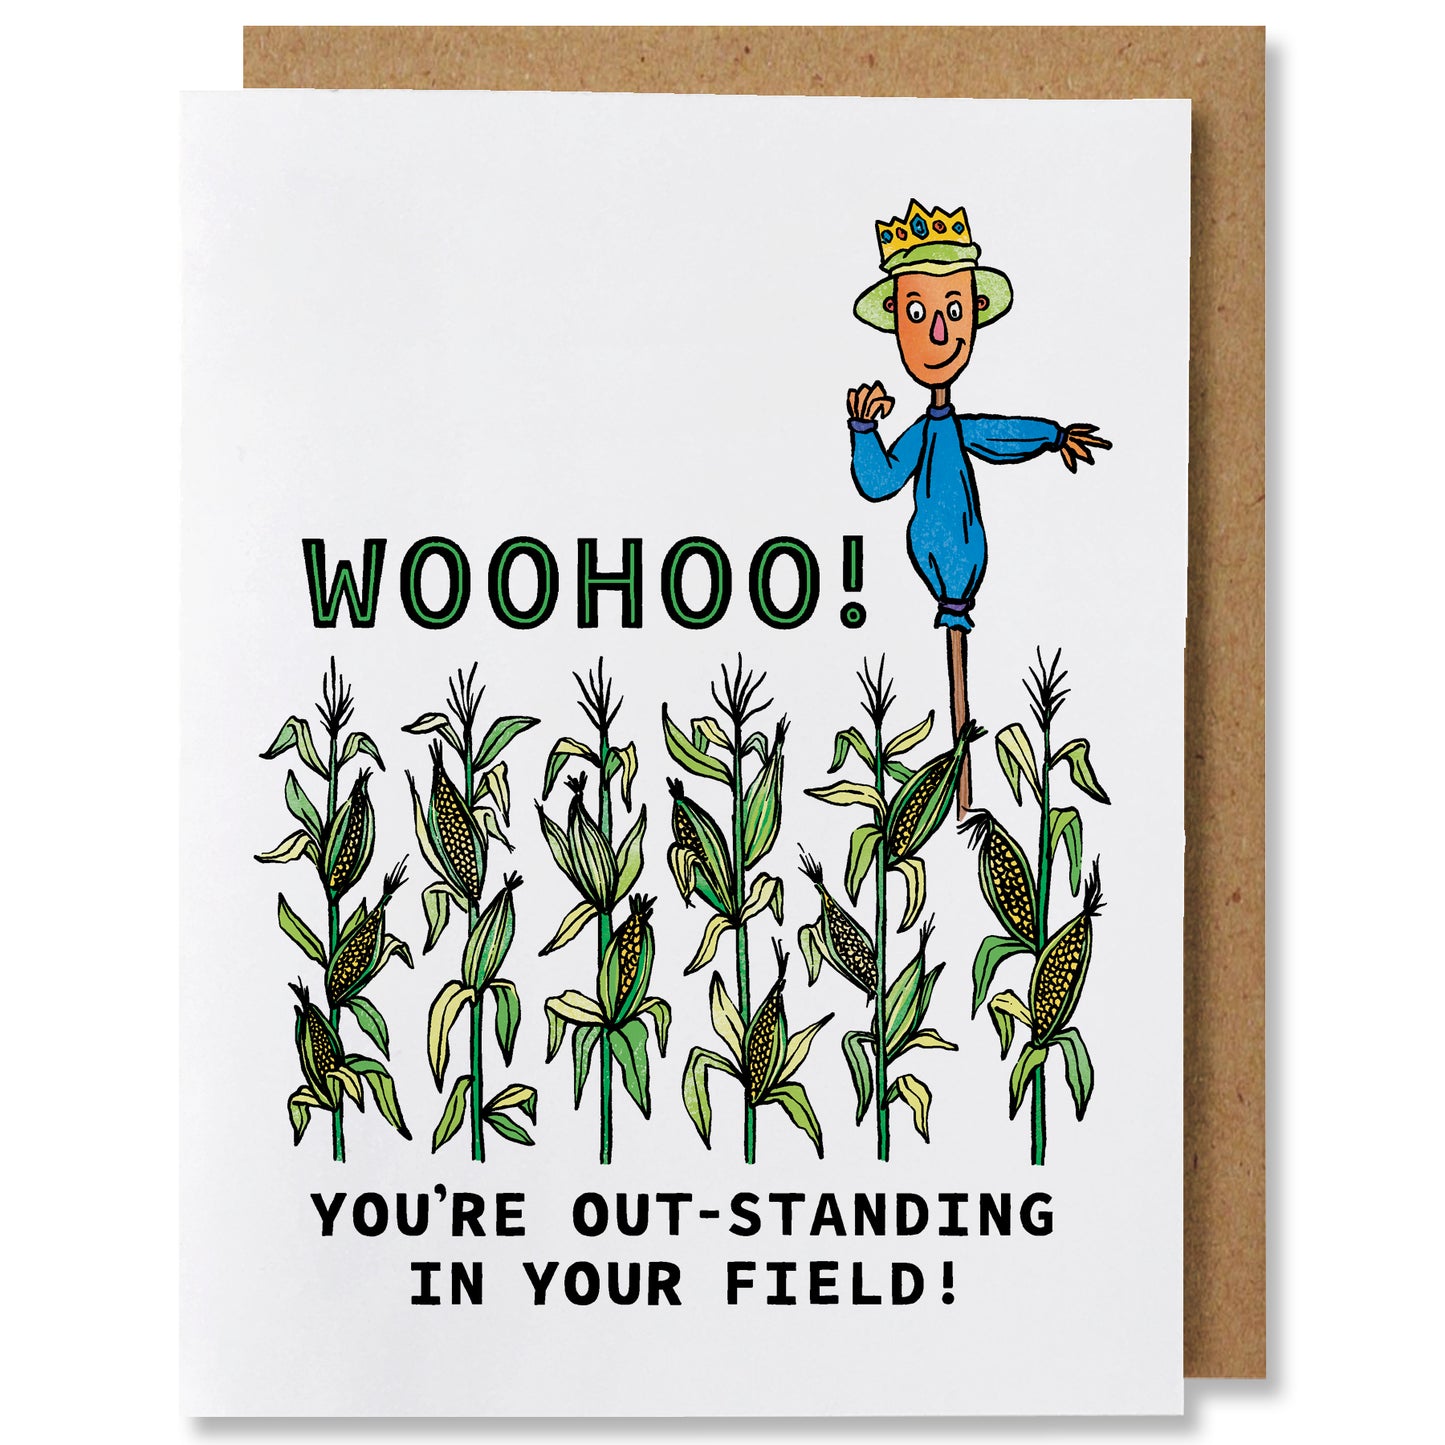 An illustrated greeting card featuring a goofy but happy scarecrow amongst a field of corn with the caption "Woohoo! You're out-standing in your field!"